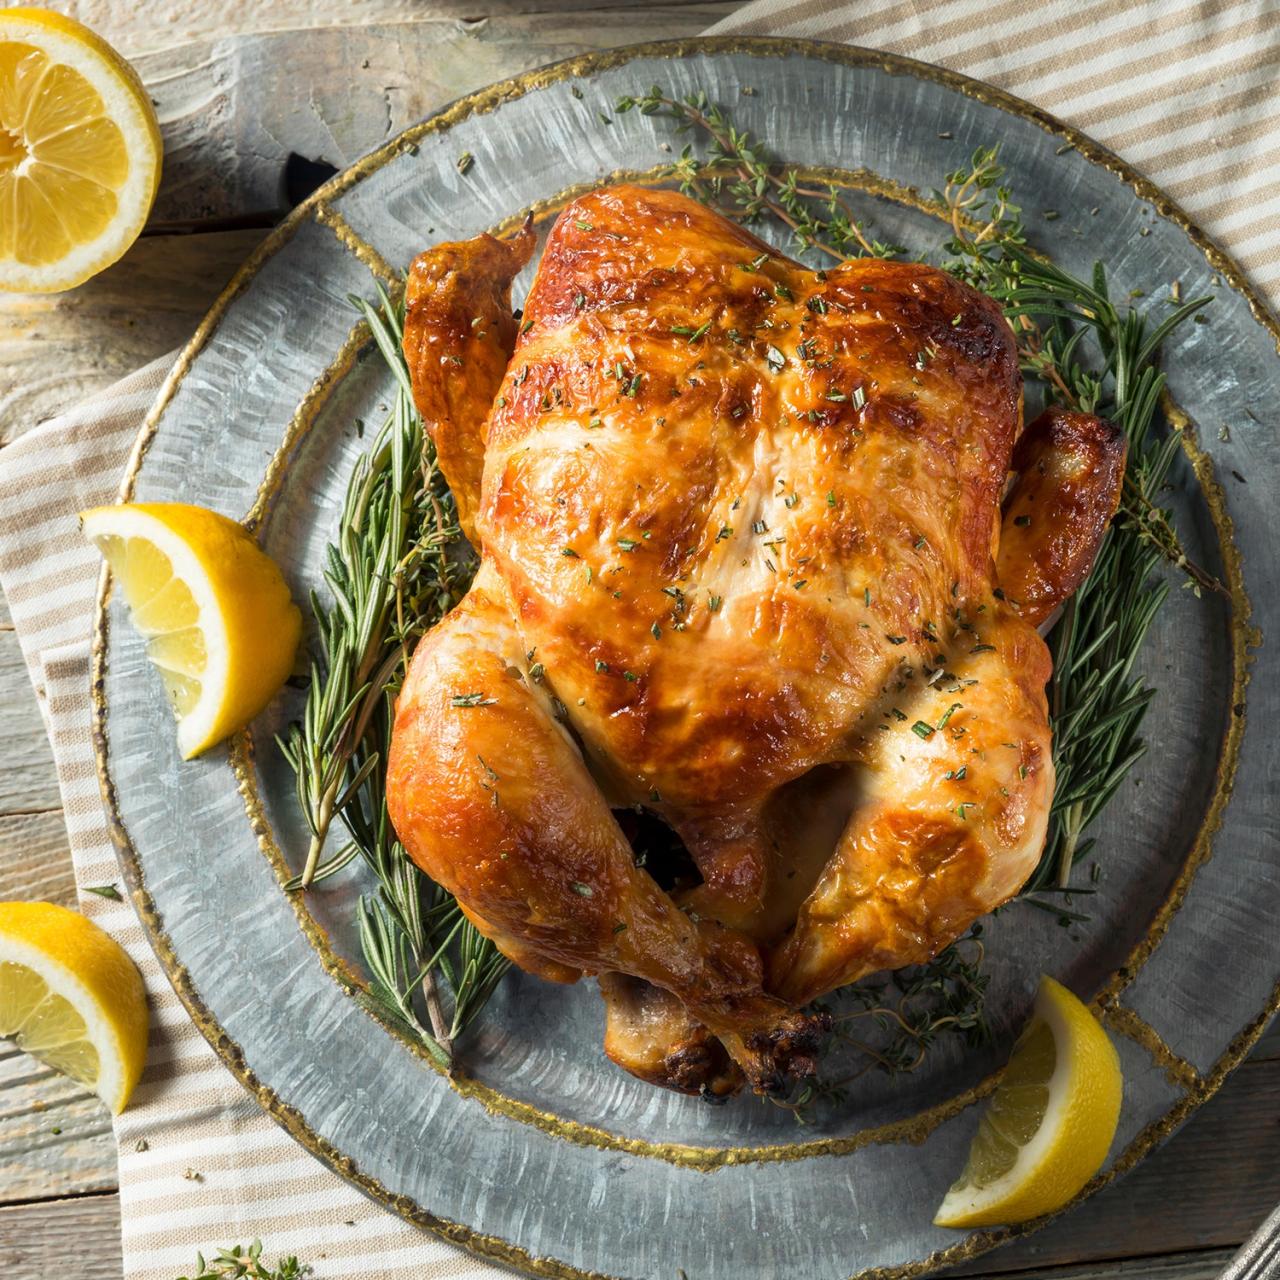 Perfecting Roast Chicken, the French Way | The New Yorker